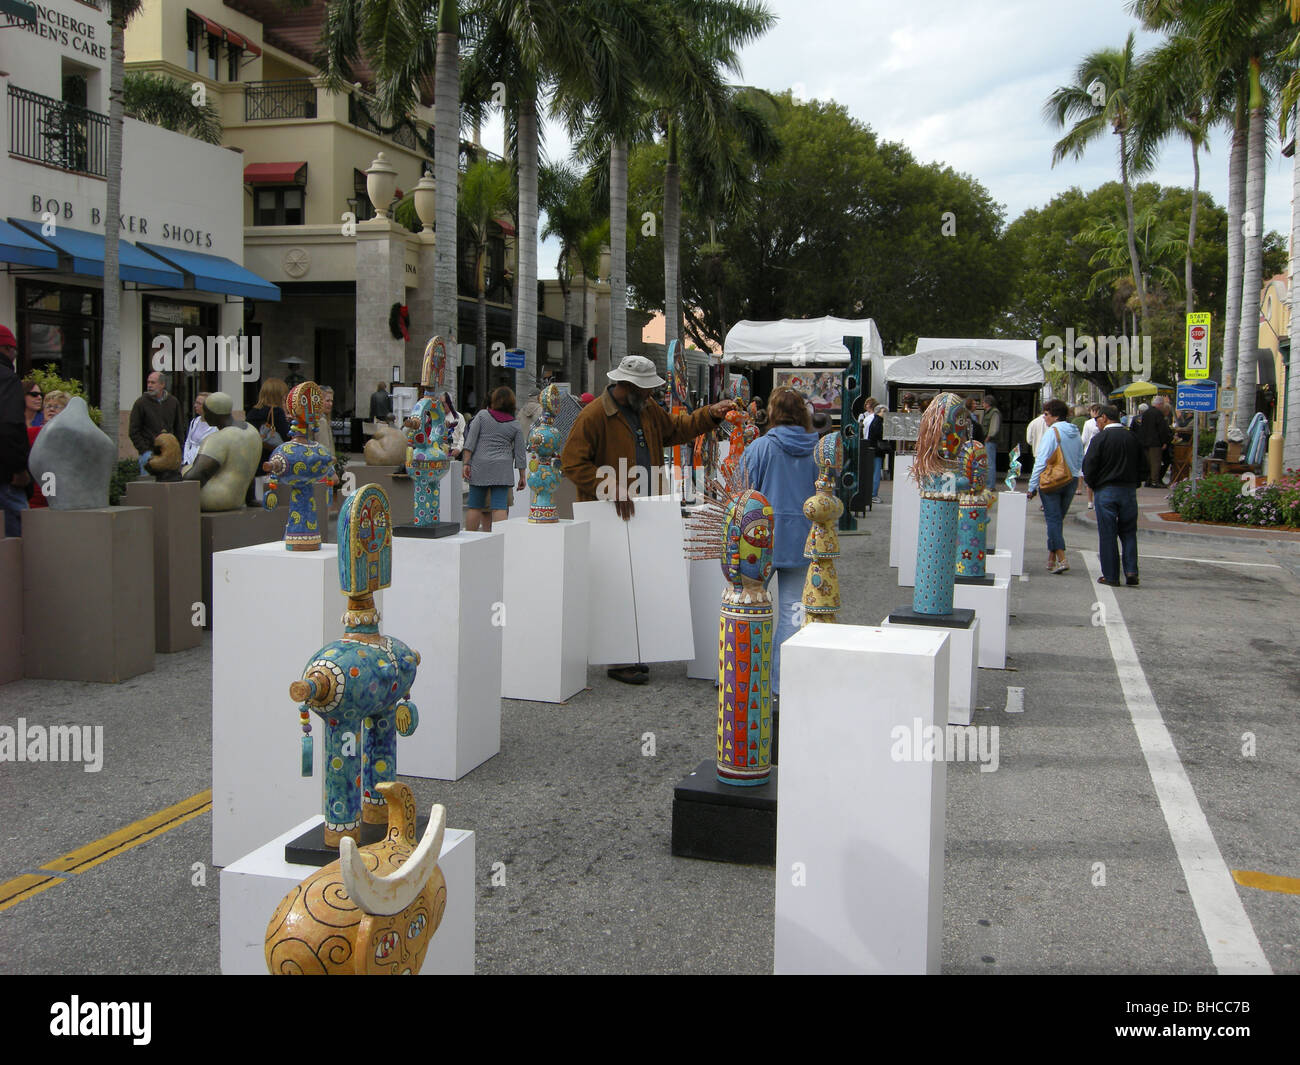 A display of decorative sculptures at an open air art show on 5th Ave south Naples Florida USA 2009 Stock Photo